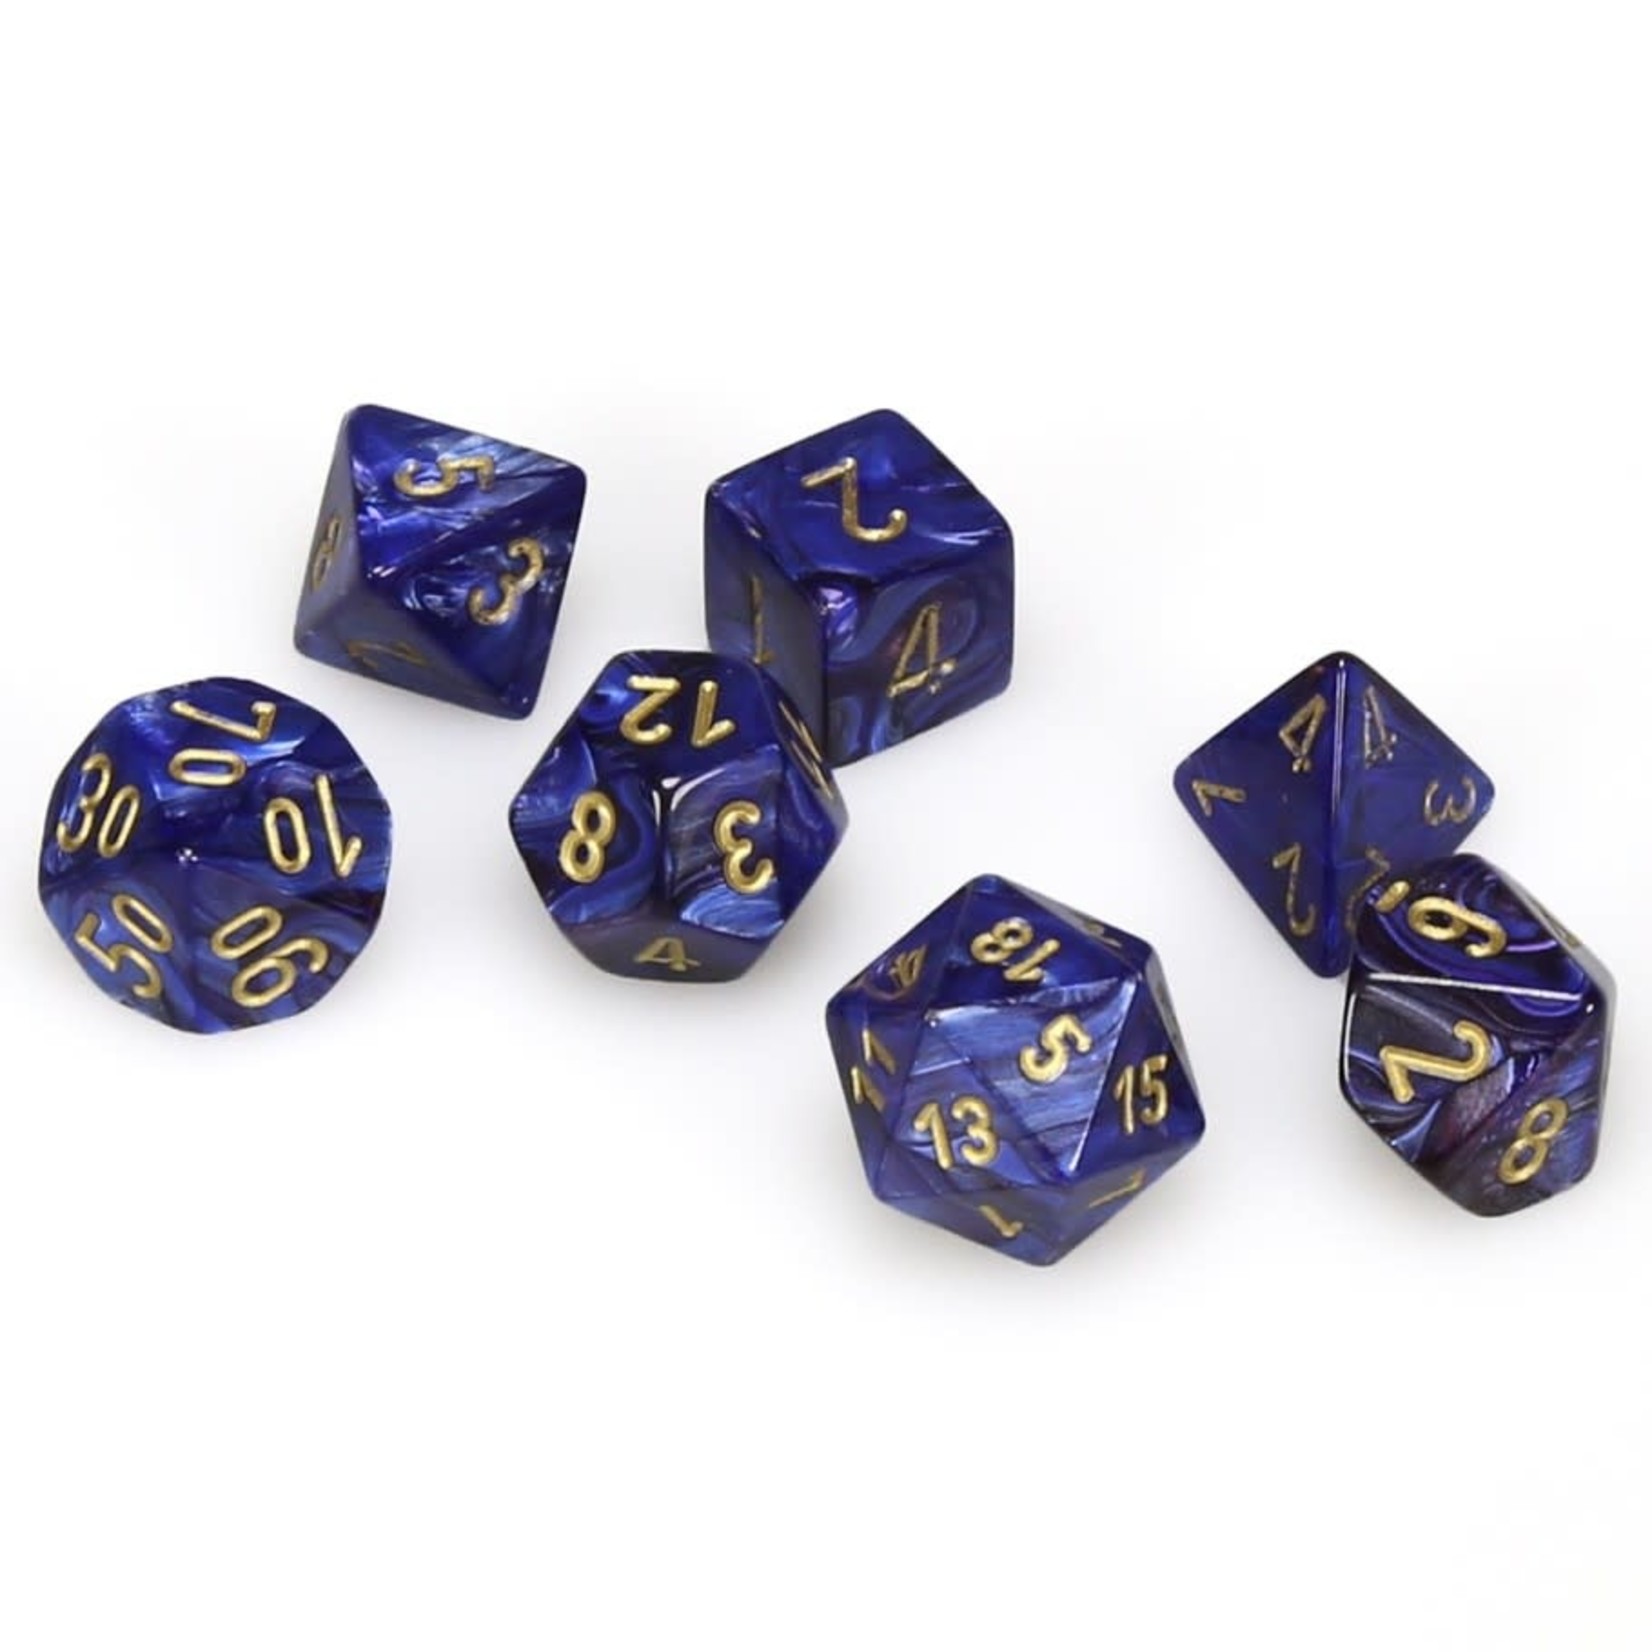 Chessex Chessex Scarab Royal Blue with Gold Polyhedral 7 die set